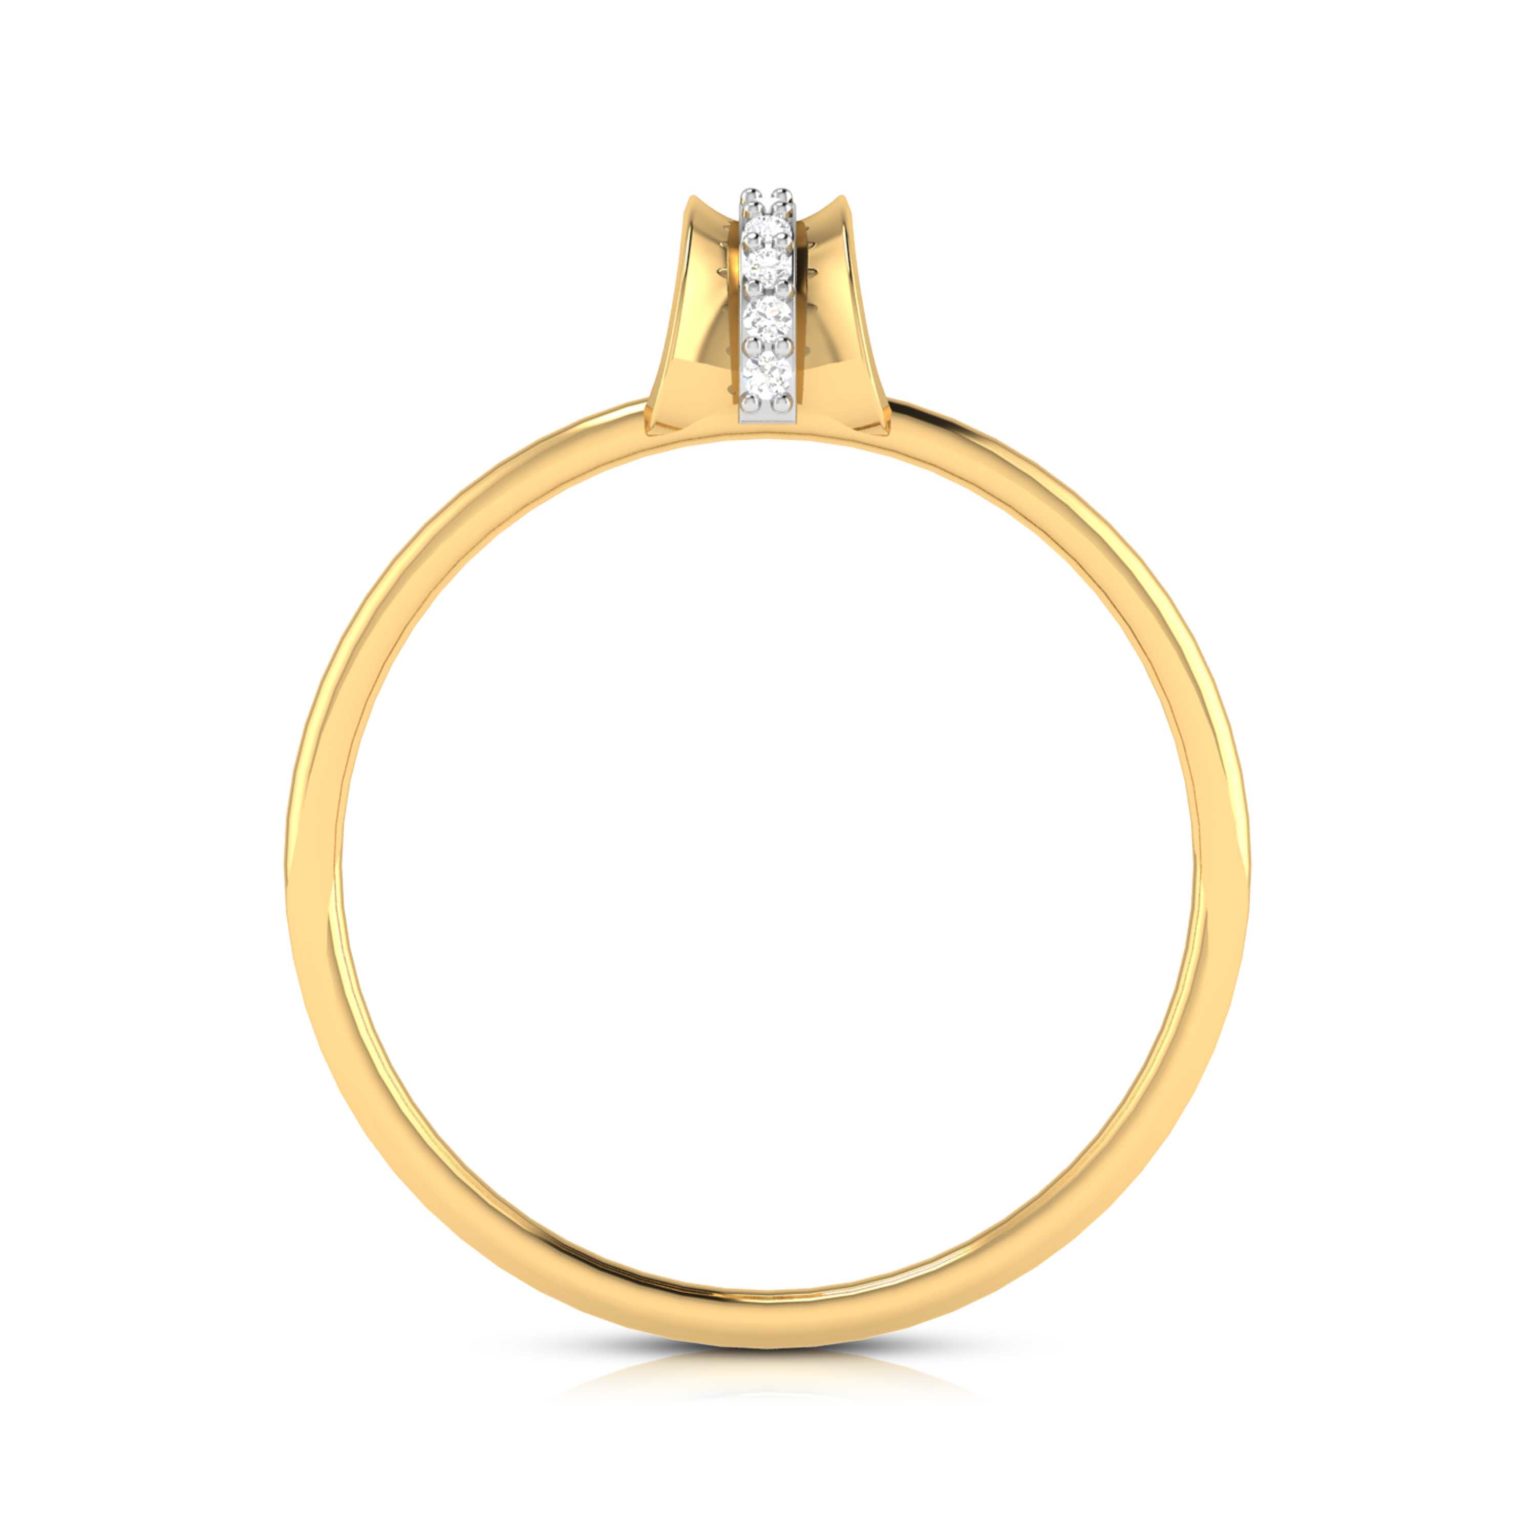 Wring Ring Collection – 18 KT – RMDG ADR – 1901